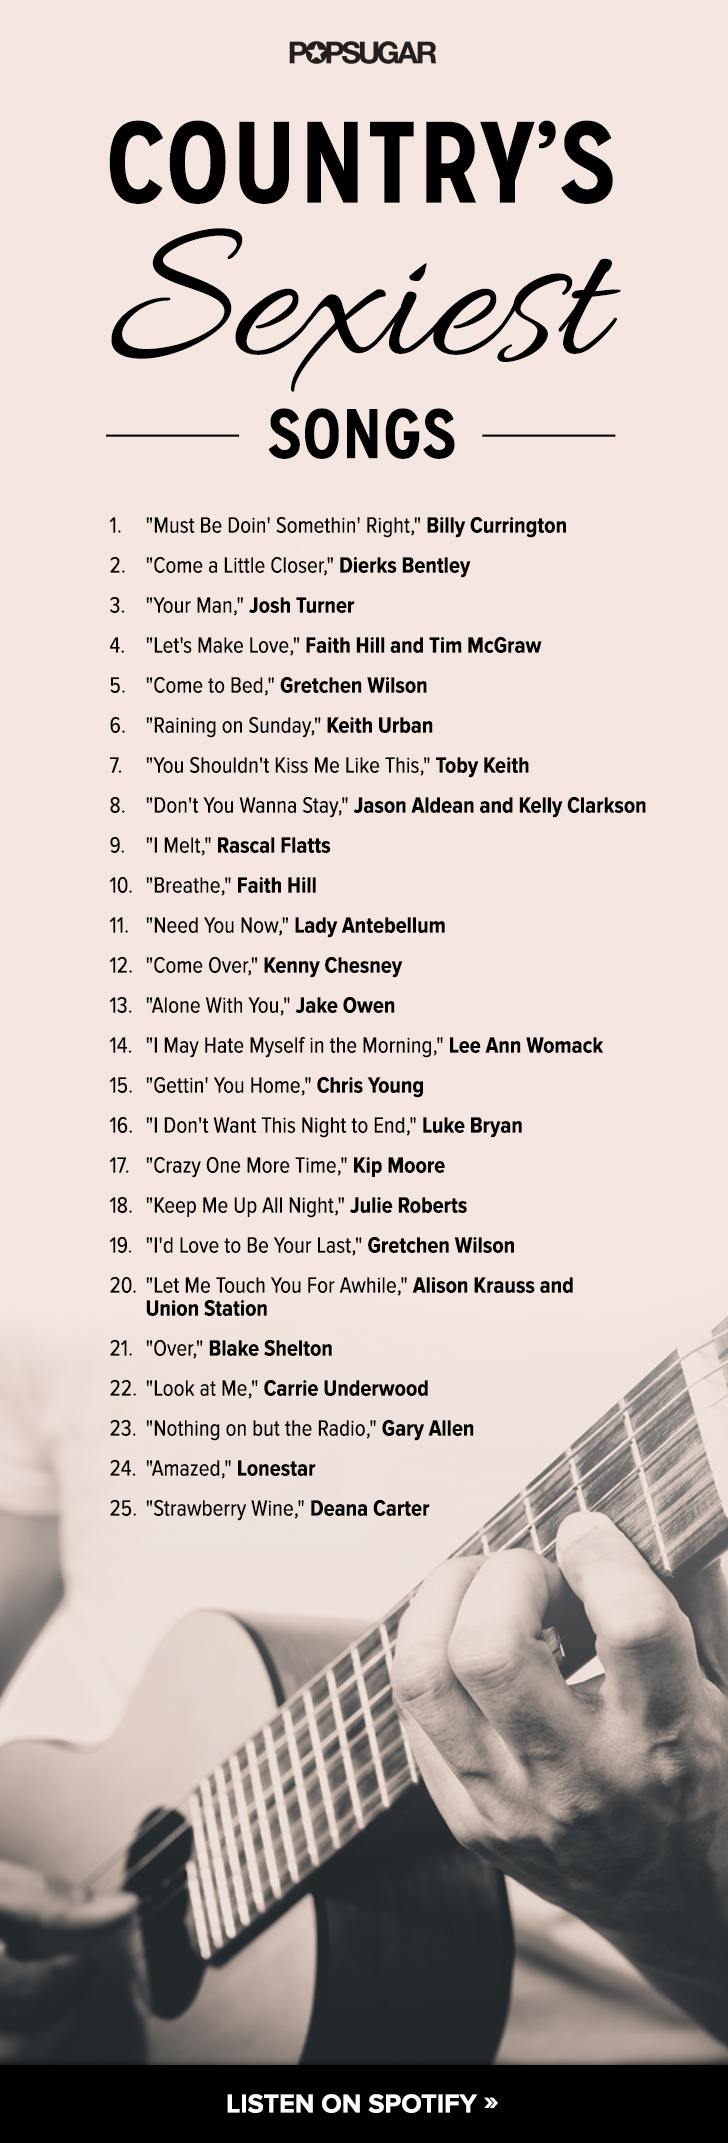 Country Love  Songs  Playlists POPSUGAR Love  Sex